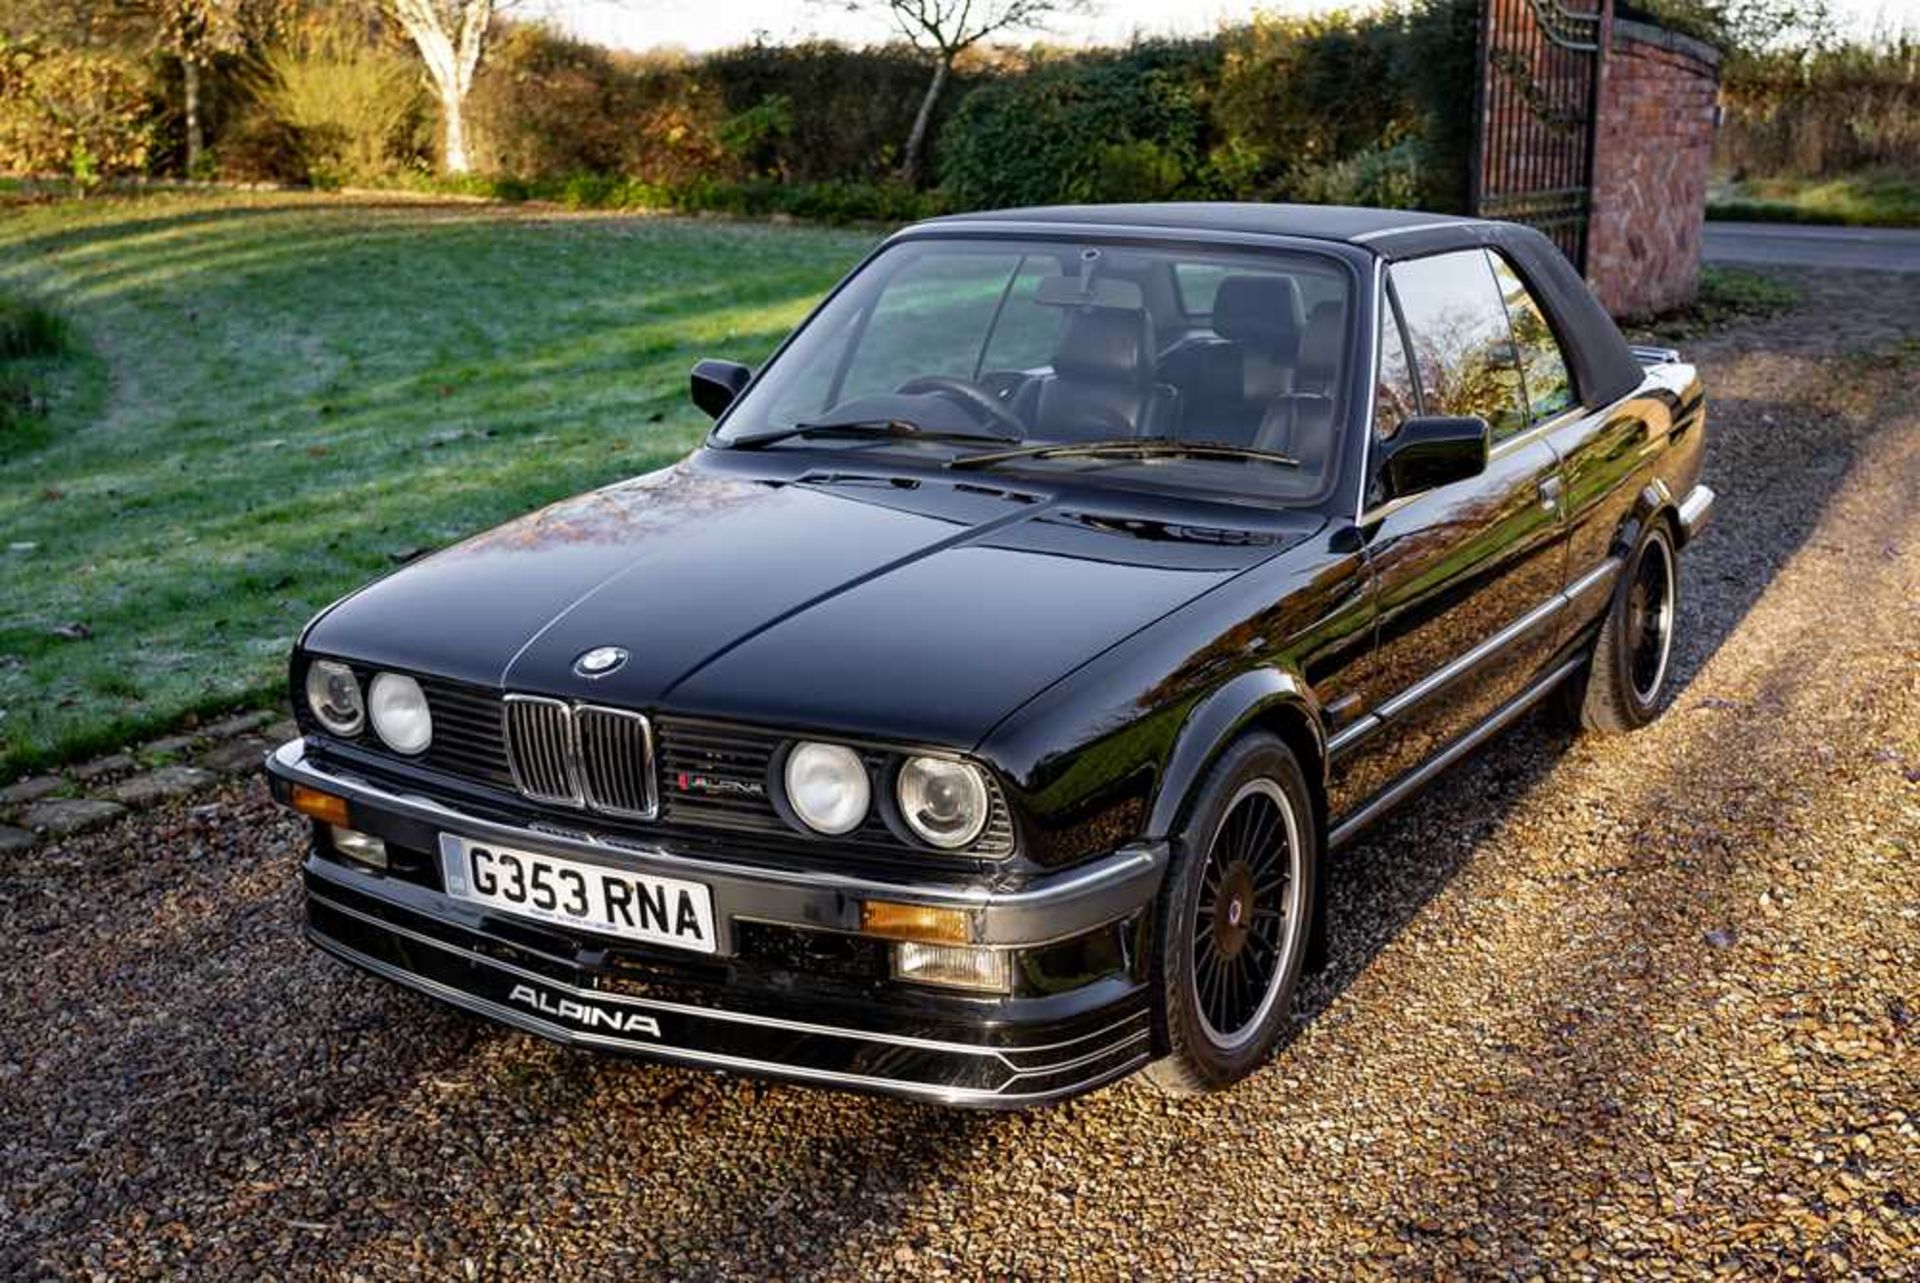 1989 BMW 320i Convertible Converted to Alpina 328i Specification - Image 7 of 51